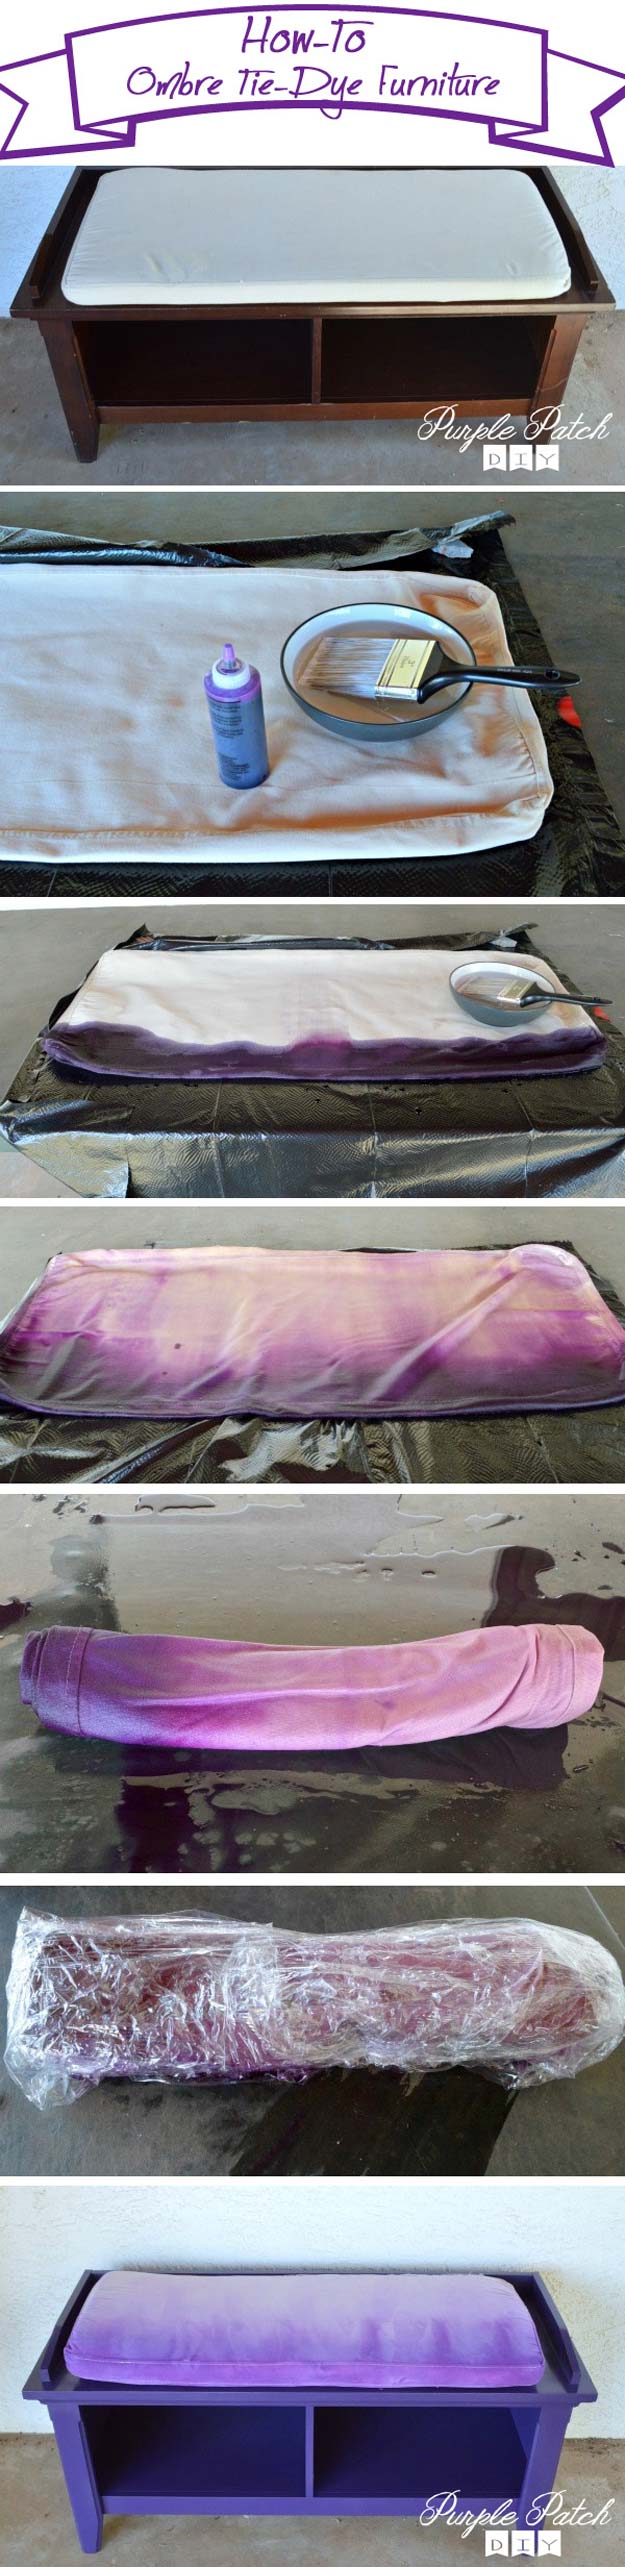 DIY Purple Room Decor - DIY Ombre Tie Dye- Best Bedroom Ideas and Projects in Purple - Cool Accessories, Crafts, Wall Art, Lamps, Rugs, Pillows for Adults, Teen and Girls Room 